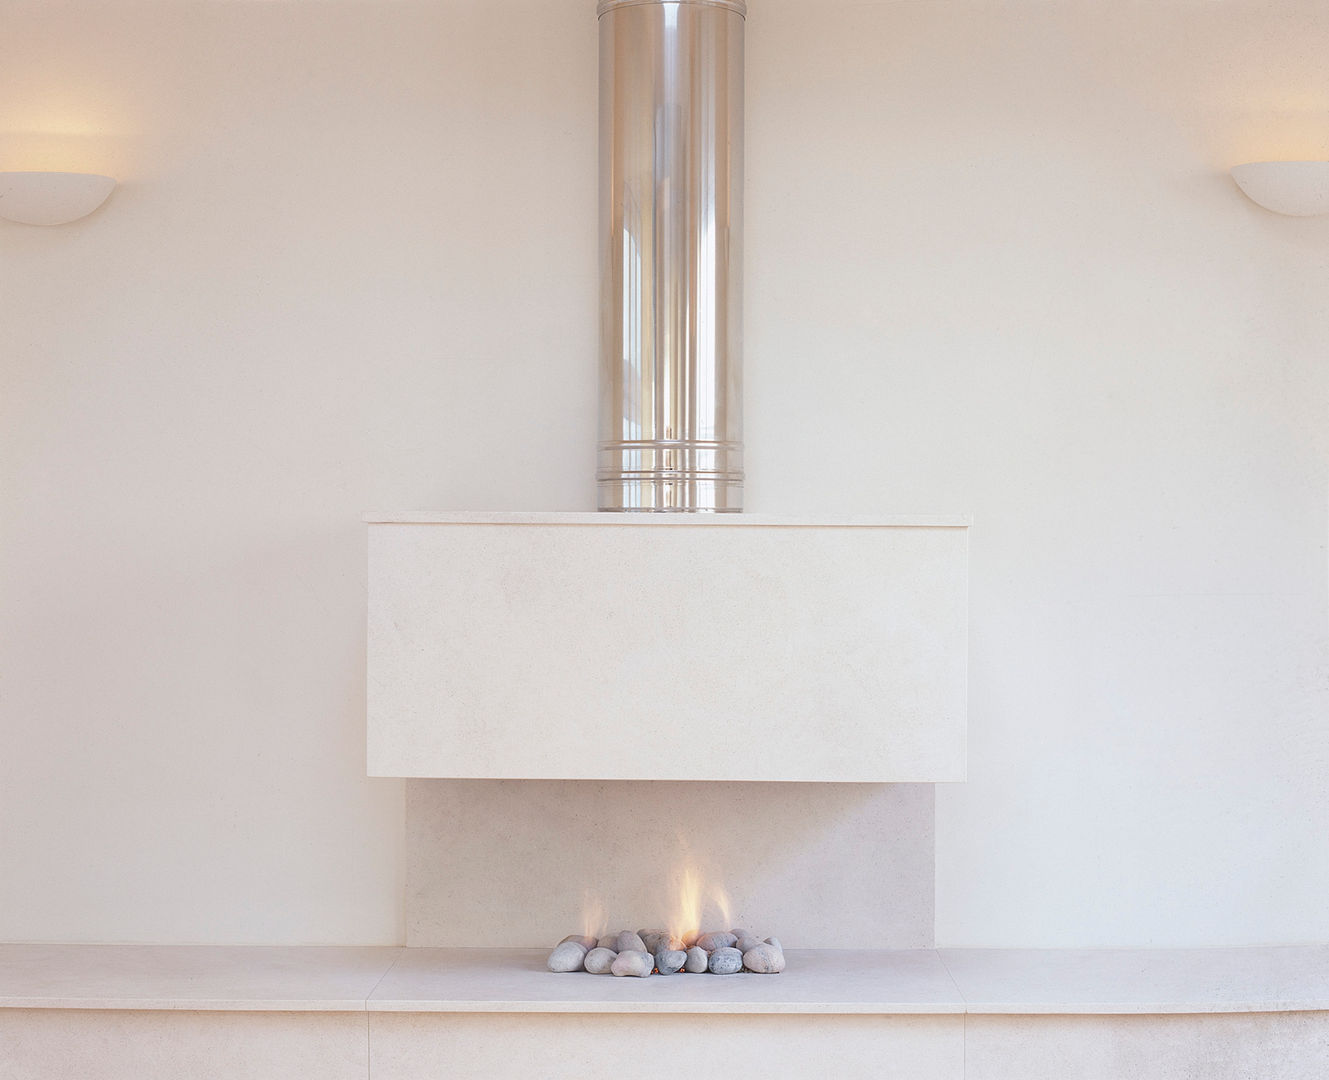 Bespoke Fireplaces: Best architects and designers in the UK, The Platonic Fireplace Company The Platonic Fireplace Company 모던스타일 거실